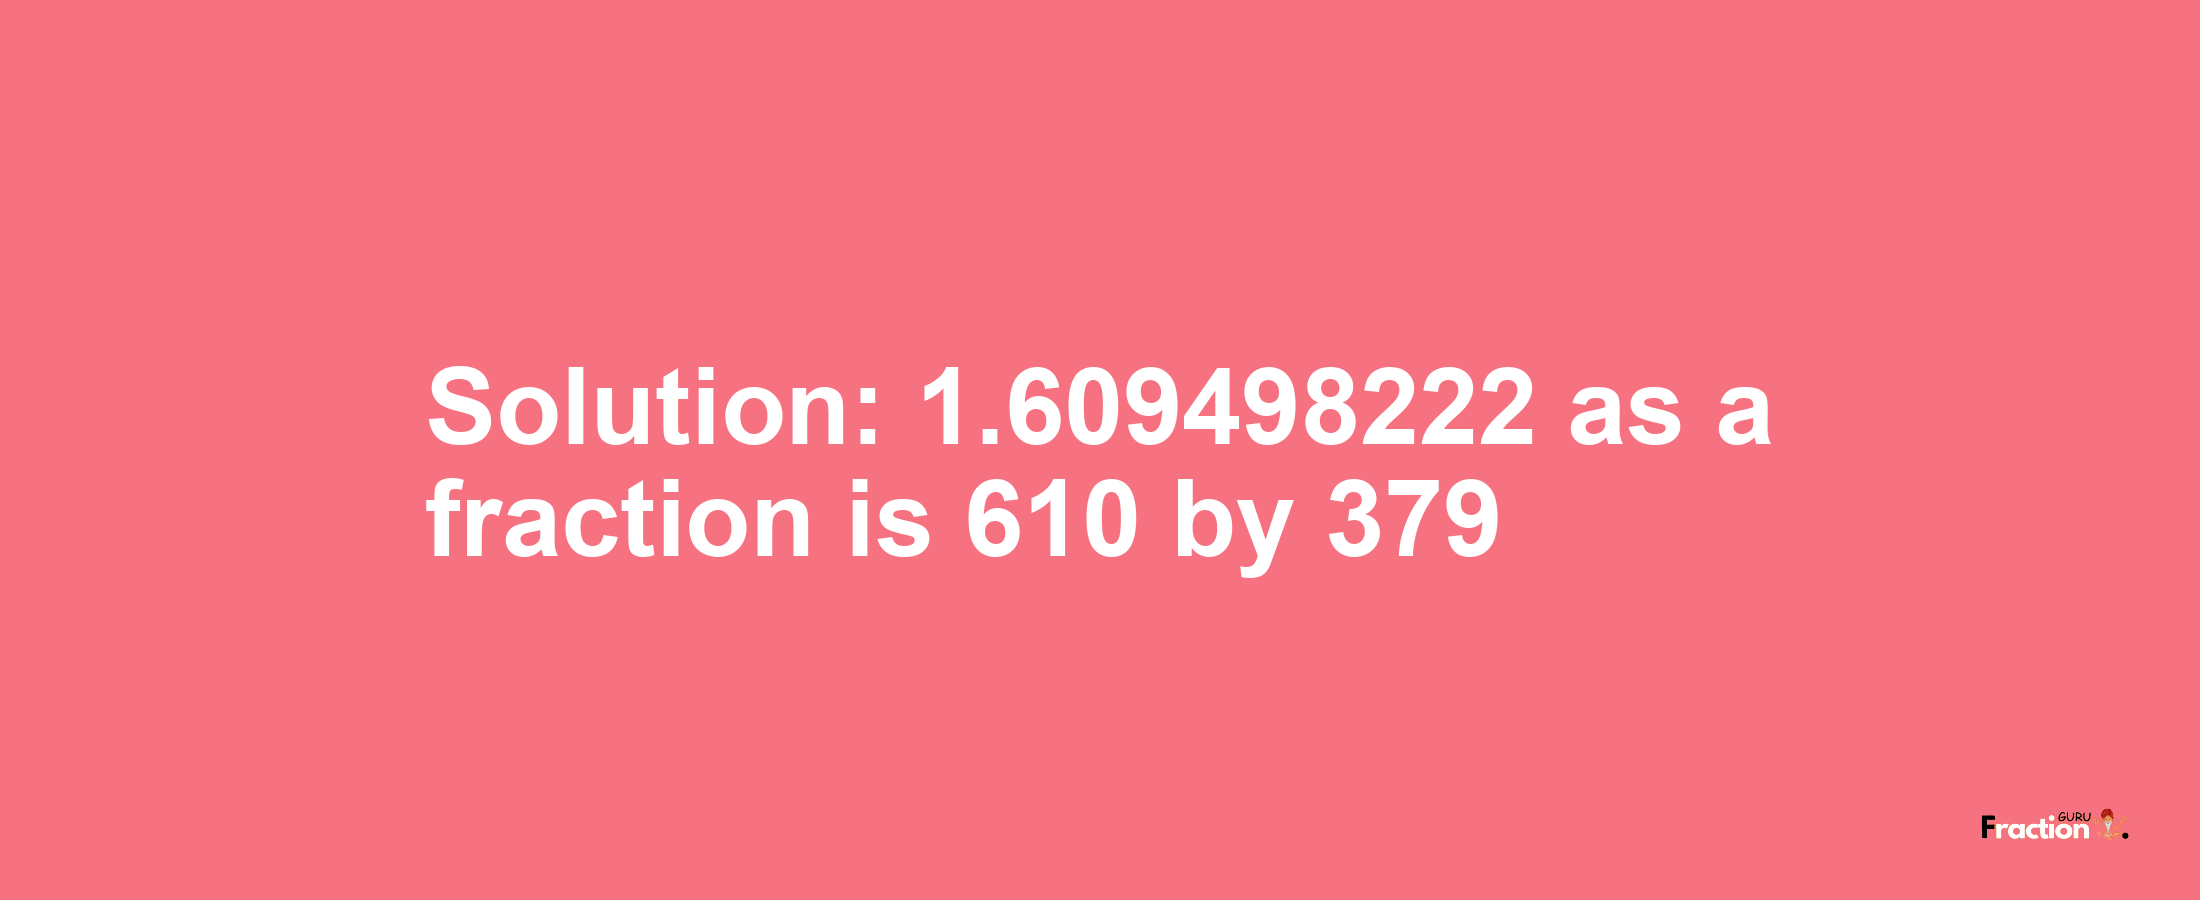 Solution:1.609498222 as a fraction is 610/379